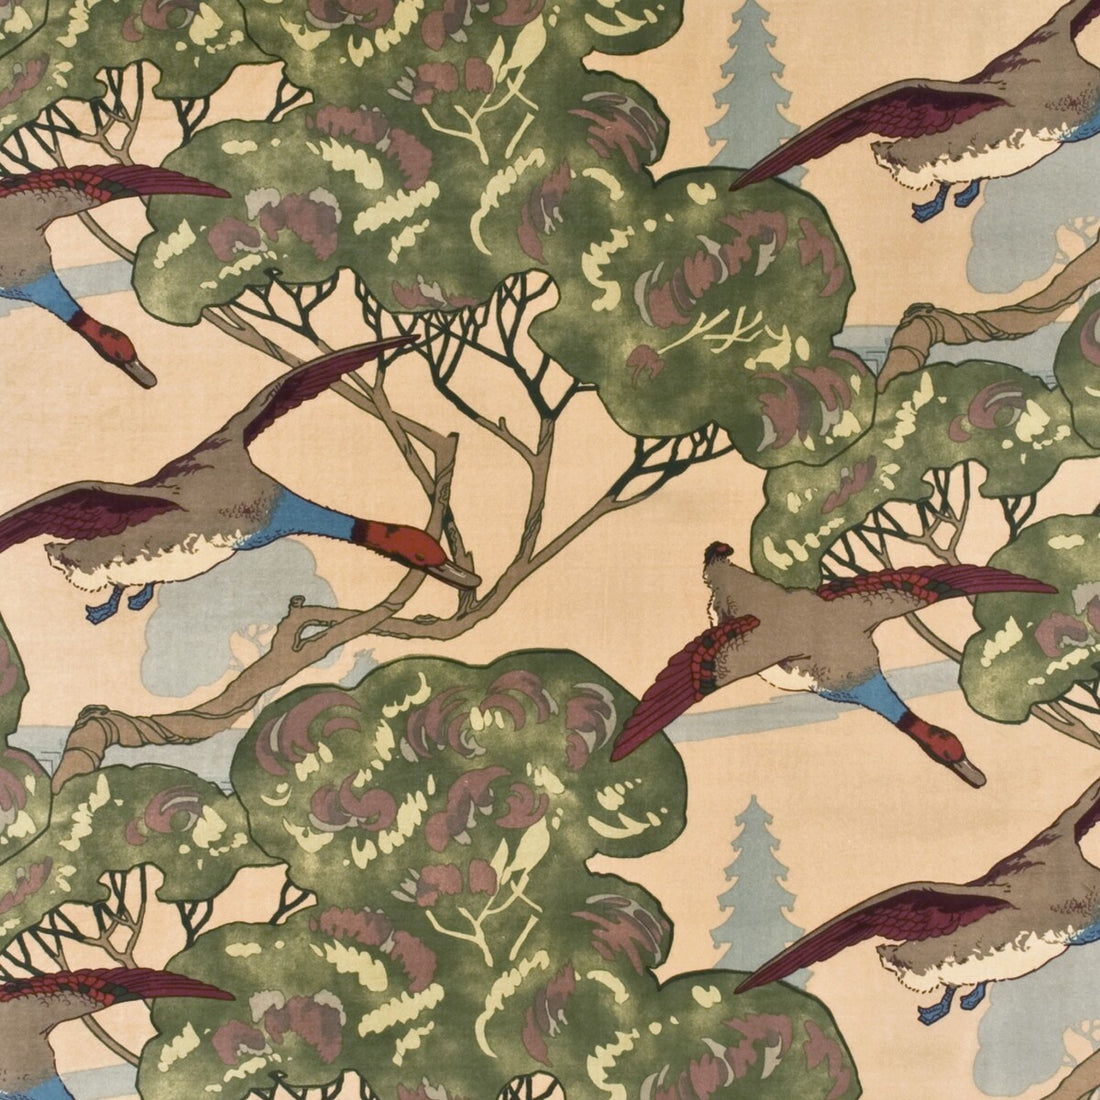 Flying Ducks Velvet fabric in camel color - pattern FD258.L102.0 - by Mulberry in the Country Weekend collection